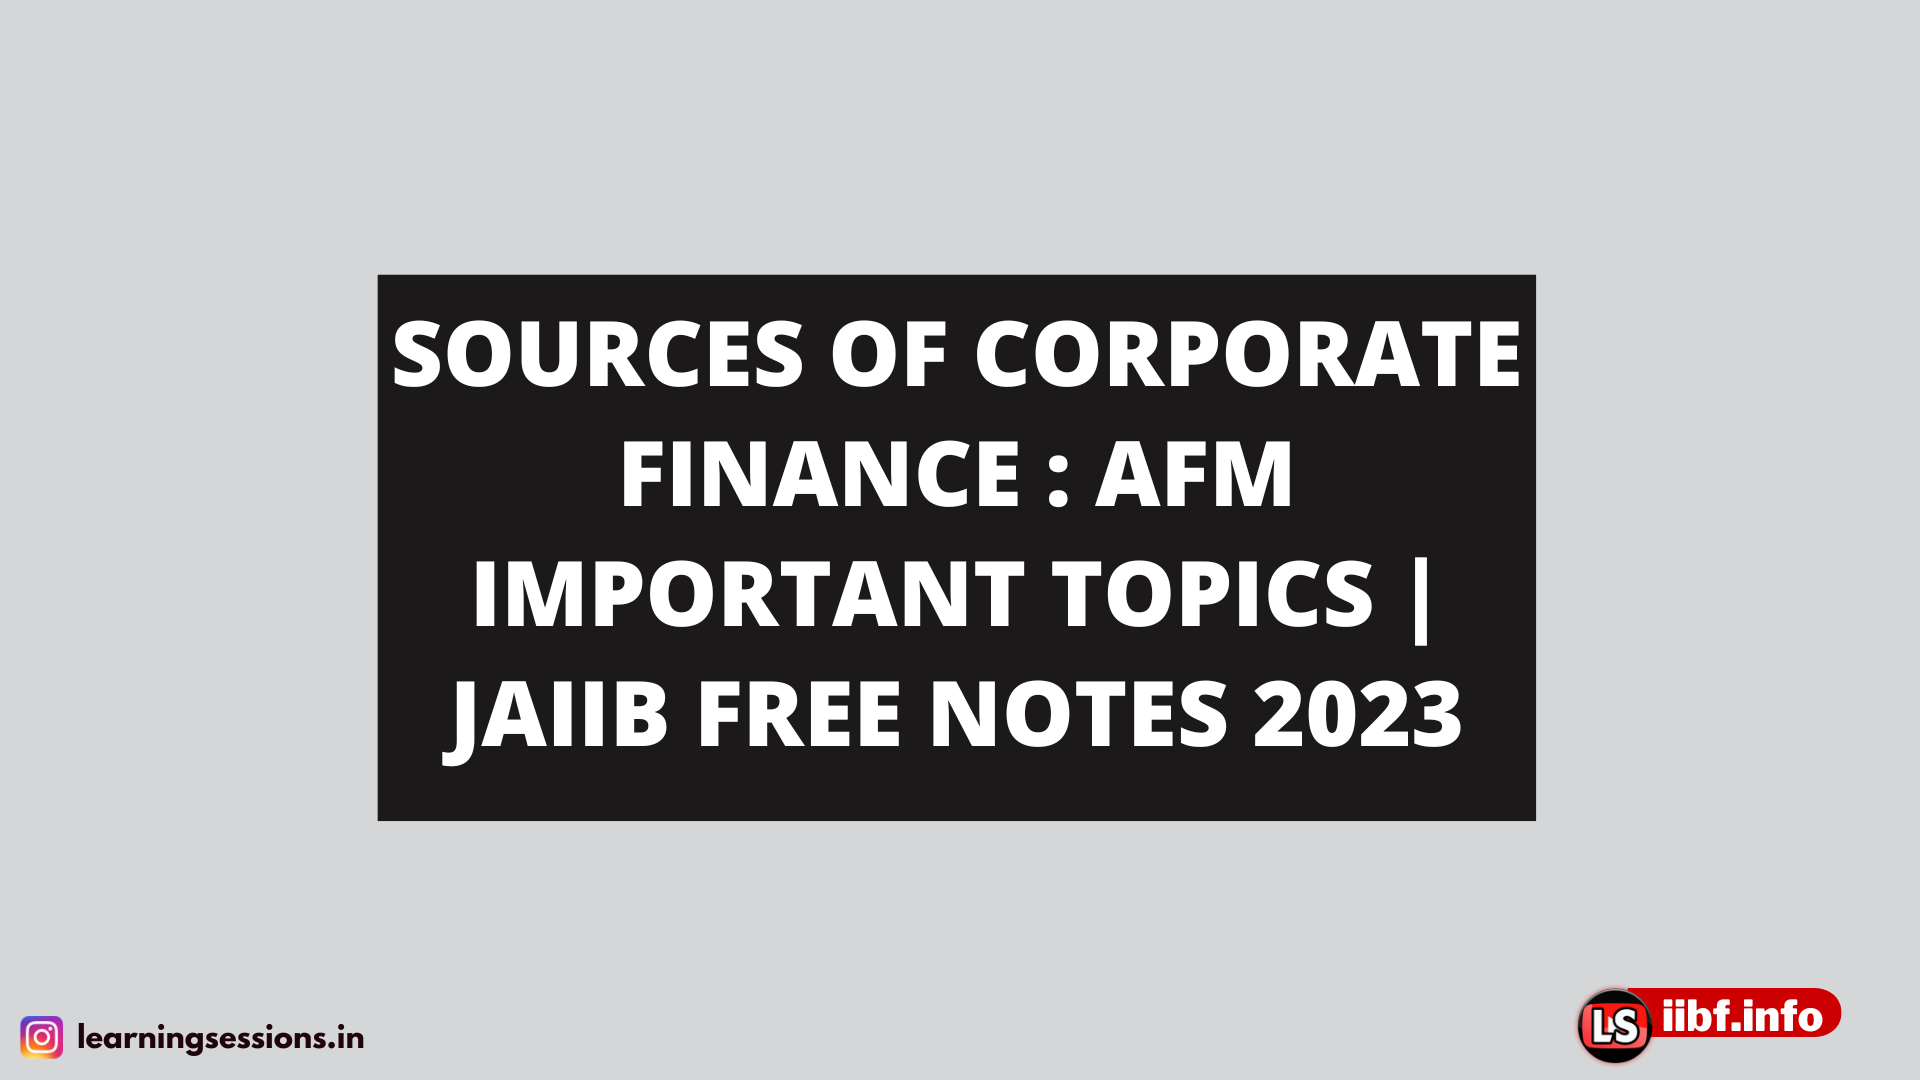 SOURCES OF CORPORATE FINANCE : AFM IMPORTANT TOPICS | JAIIB FREE NOTES 2023